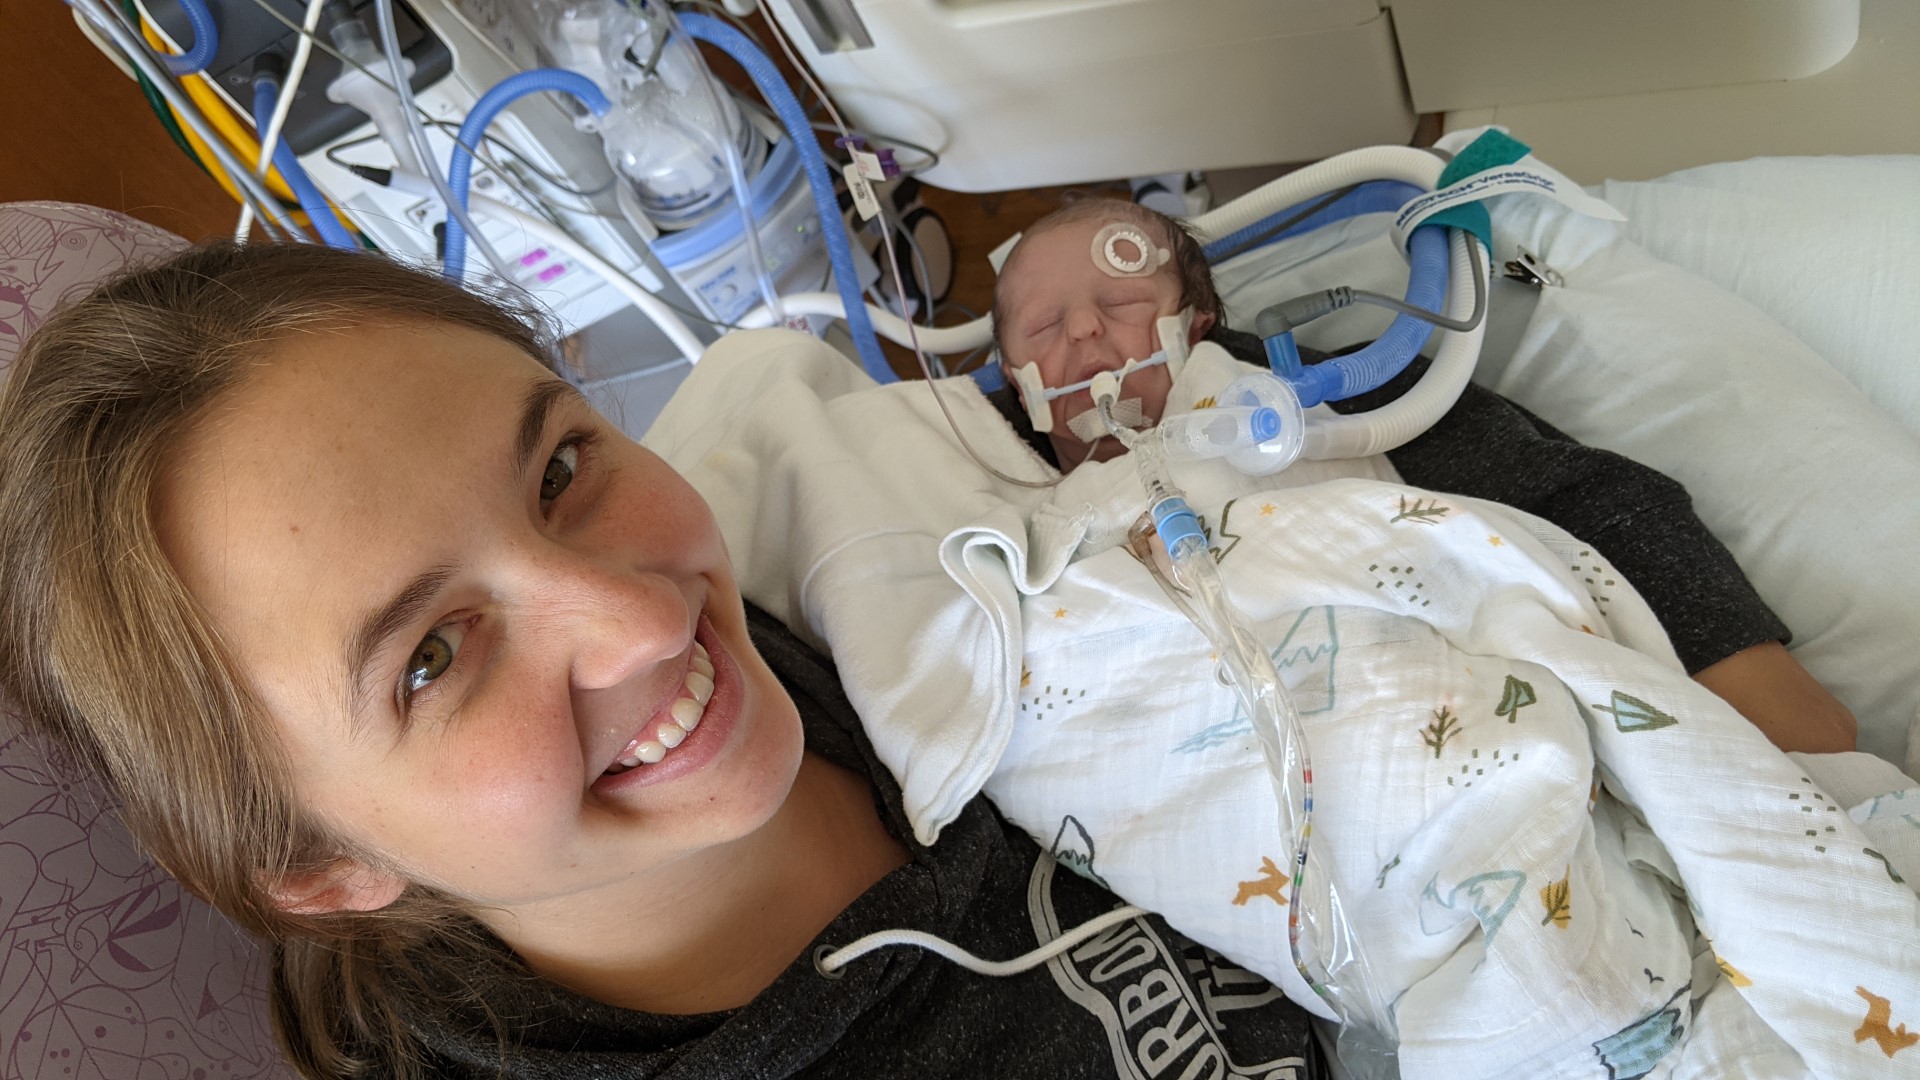 Becky cuddling our son Wyatt in the NICU while he is on ventilator